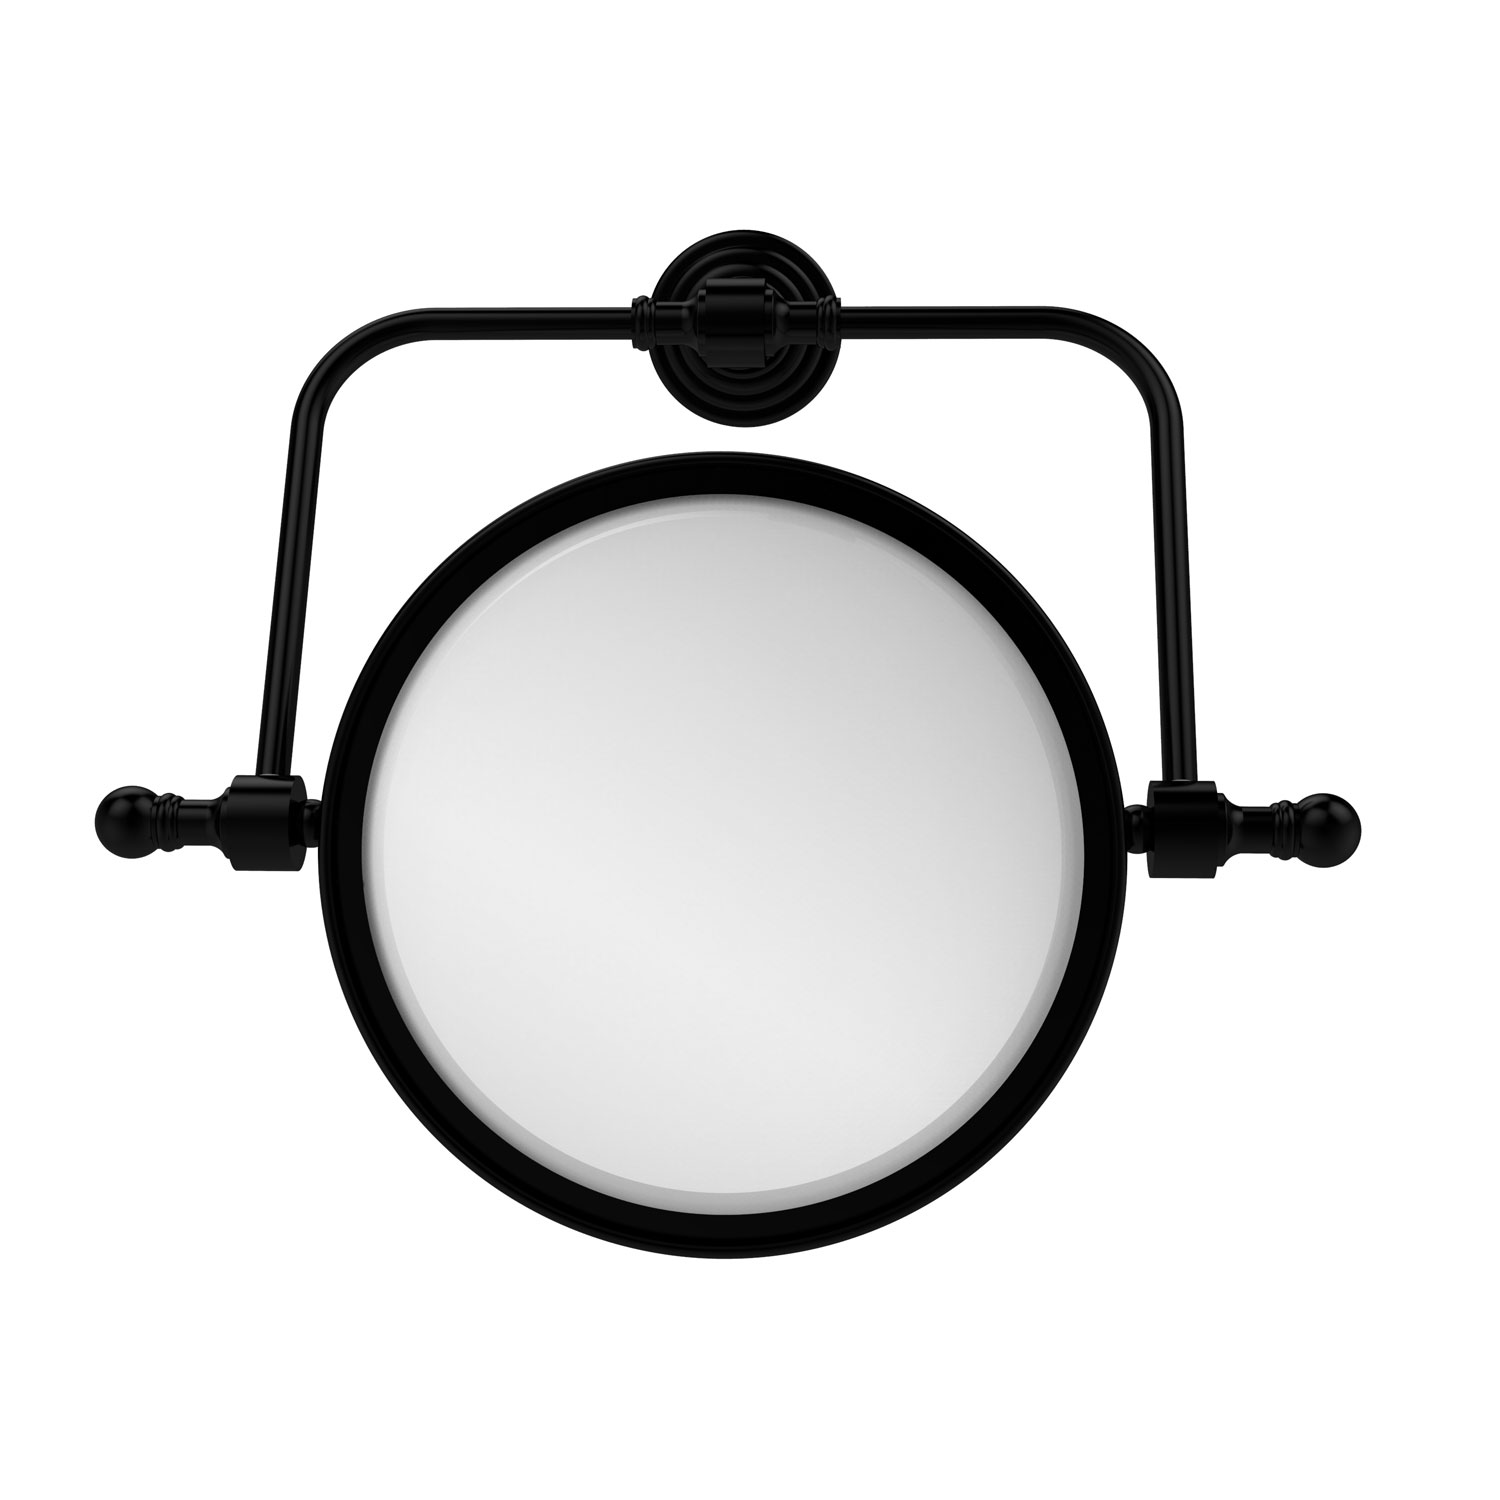 Retro Wave Collection Wall Mounted Swivel Make-Up Mirror 8 Inch Diameter With 2X Magnification, Matte Black